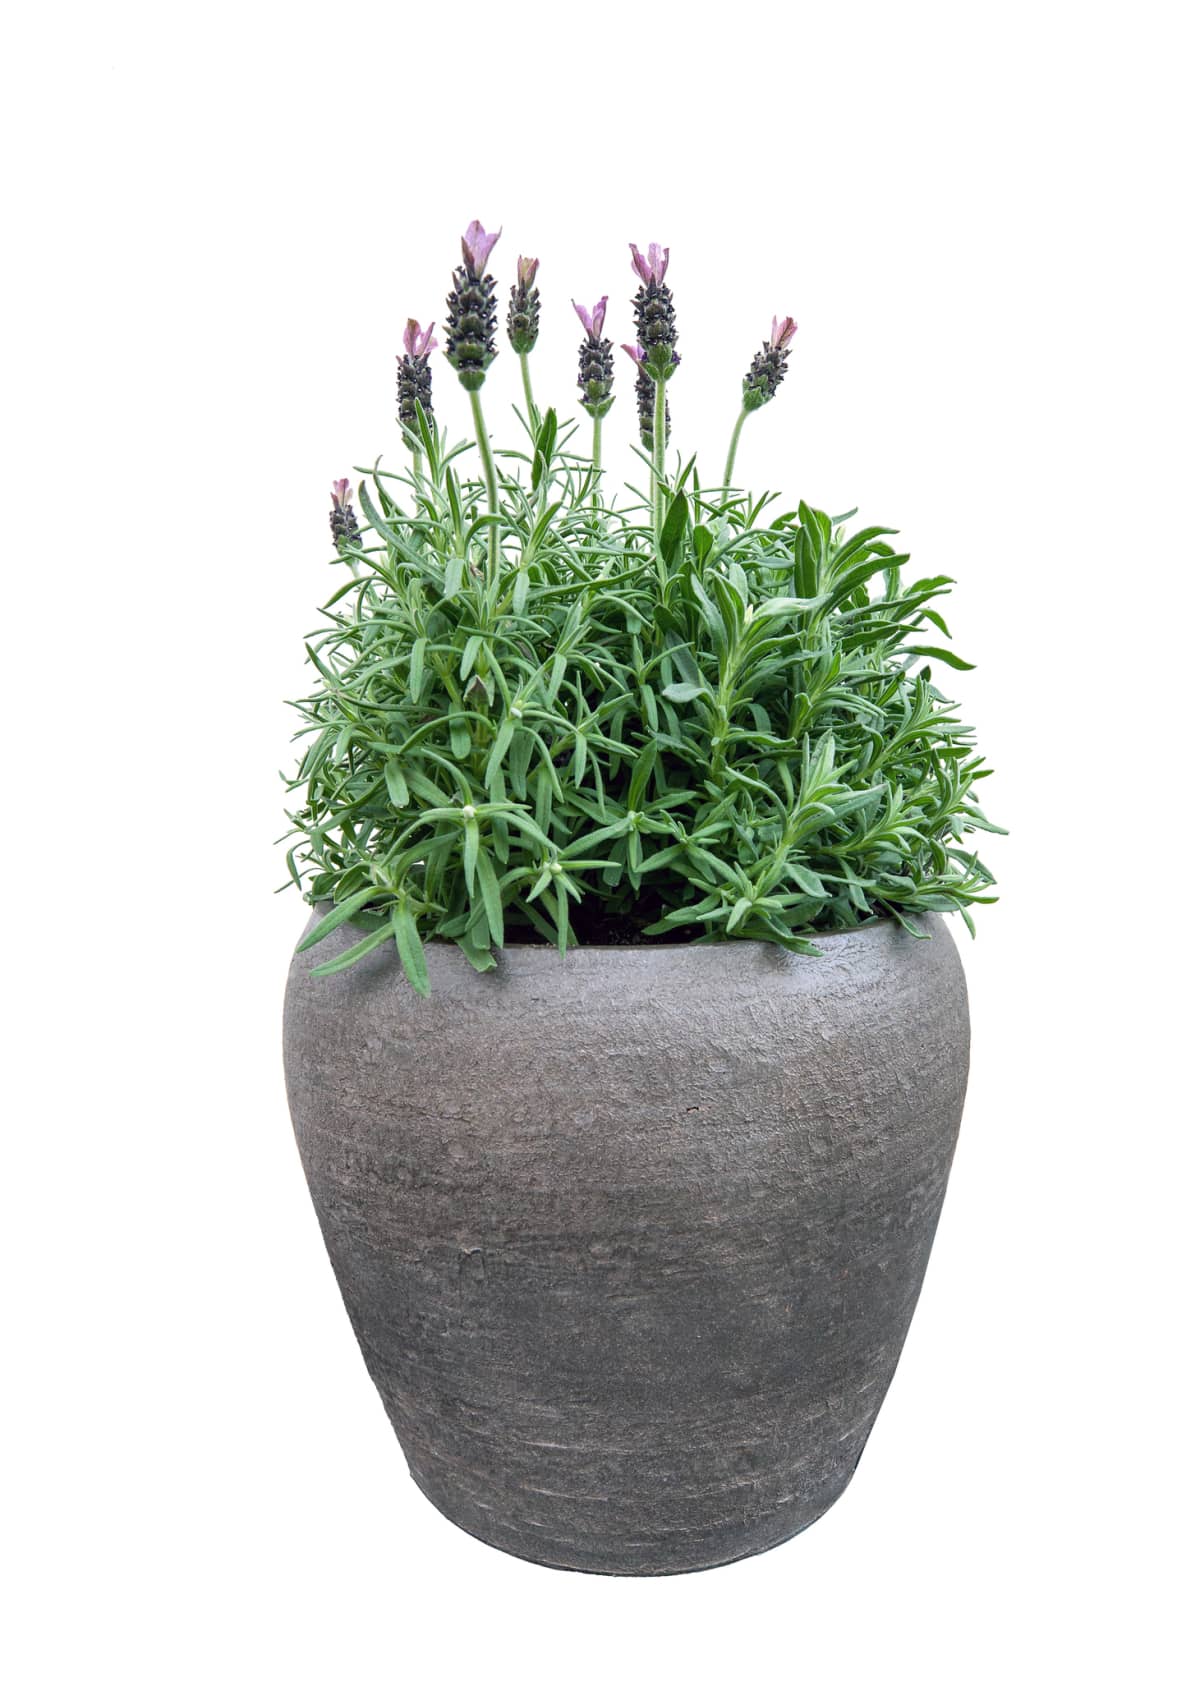 A plant with flowers in a tall planter.